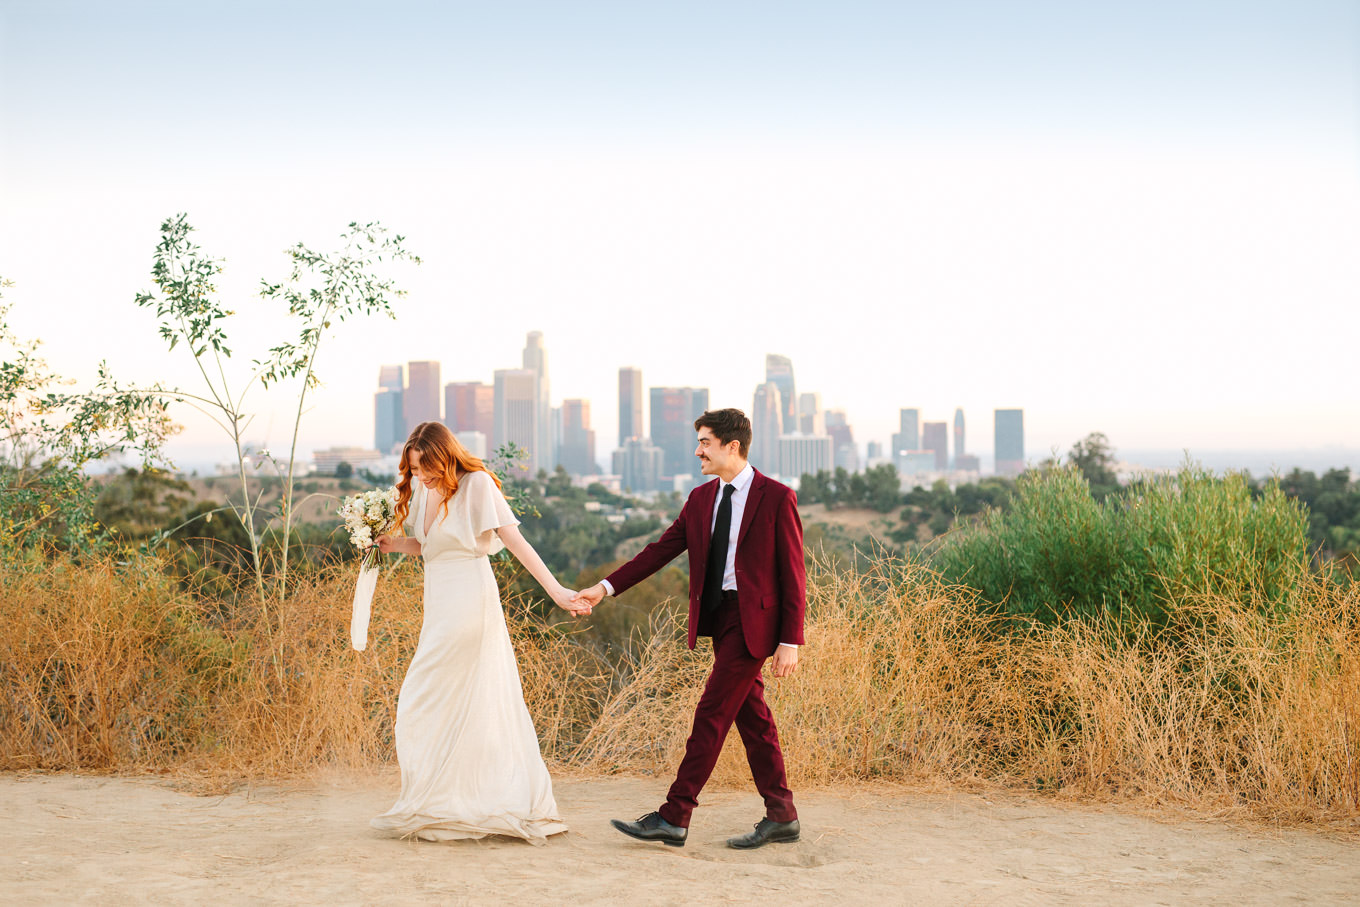 Couple walking in front of LA skyline | Los Angeles Elysian Park Elopement | Colorful and elevated wedding photography for fun-loving couples in Southern California | #LosAngelesElopement #elopement #LAarboretum #LAskyline #elopementphotos   Source: Mary Costa Photography | Los Angeles